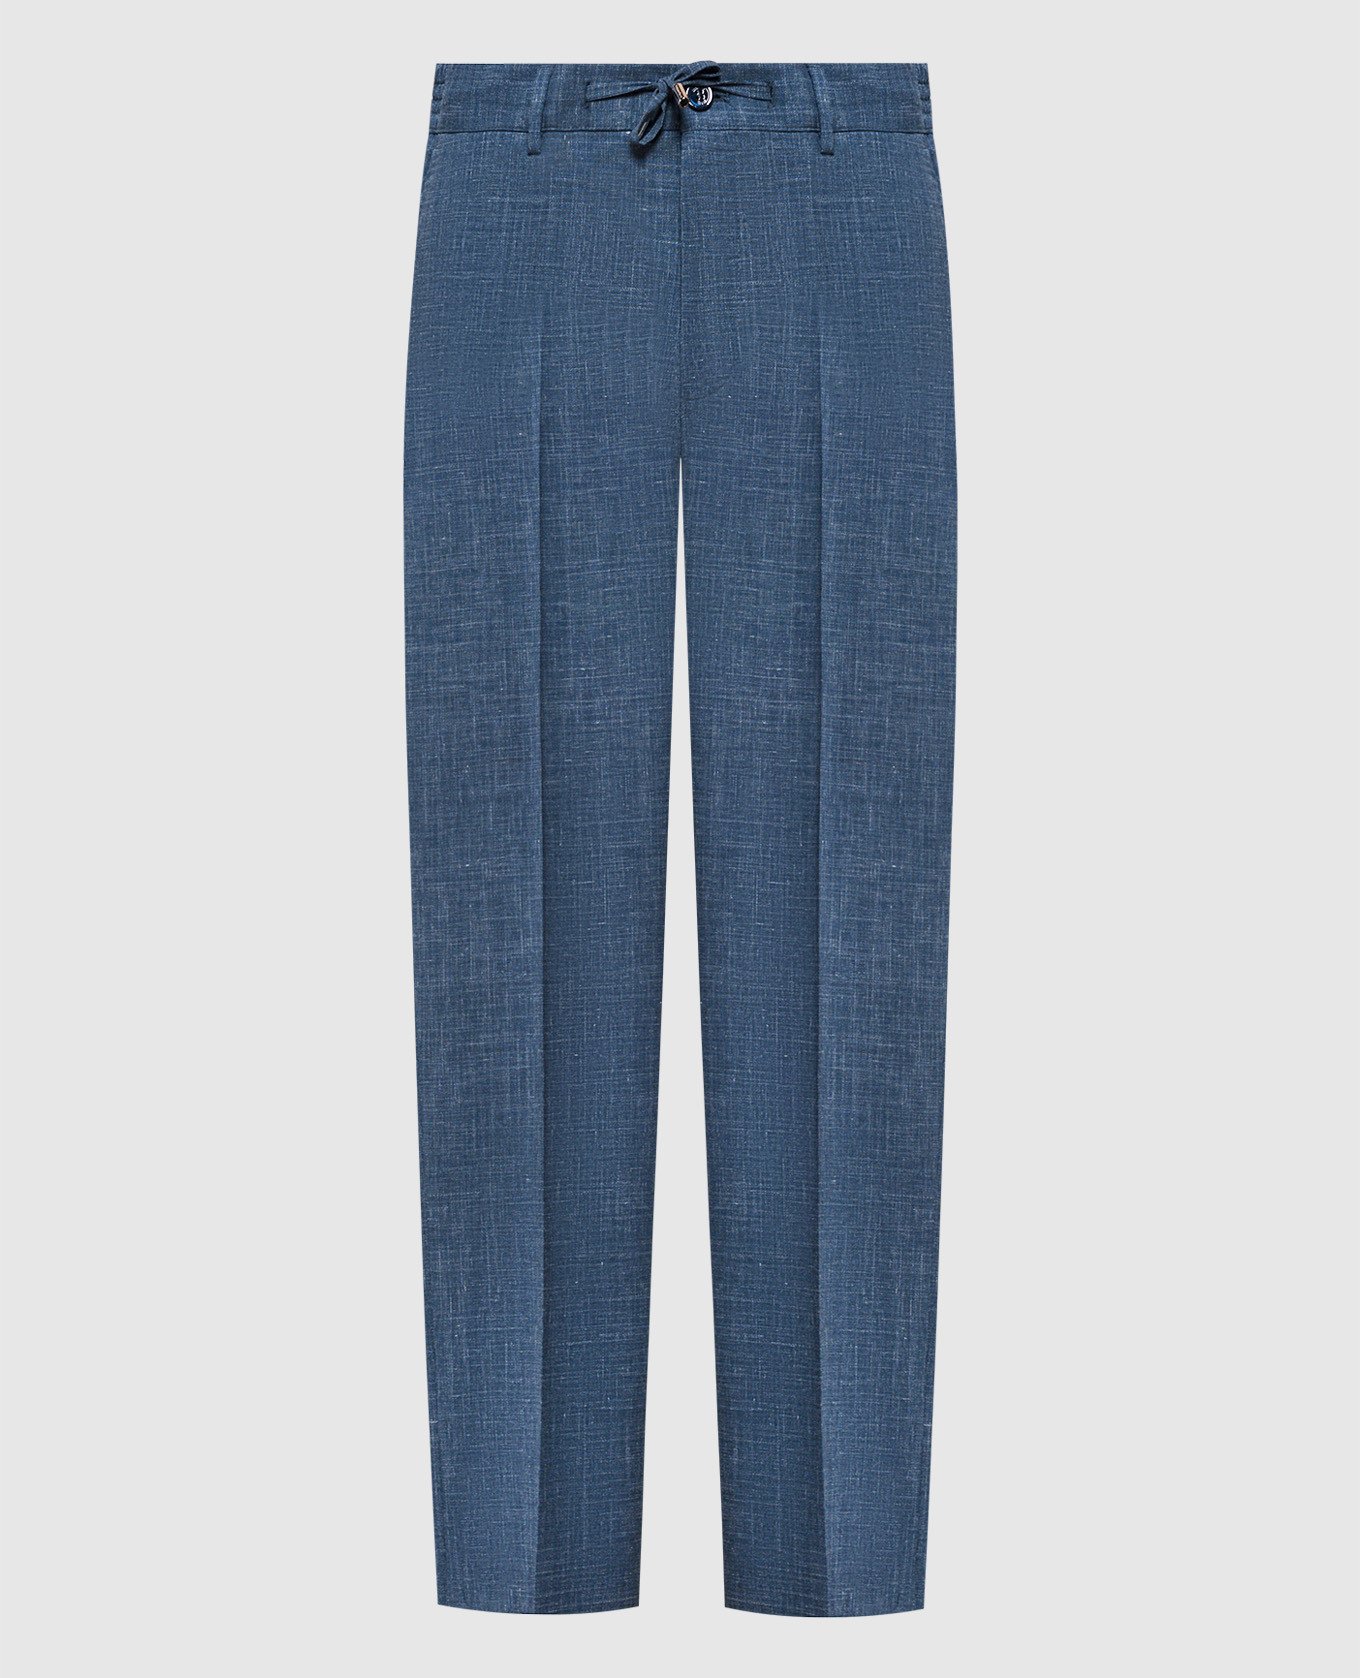 Blue pants made of wool and linen